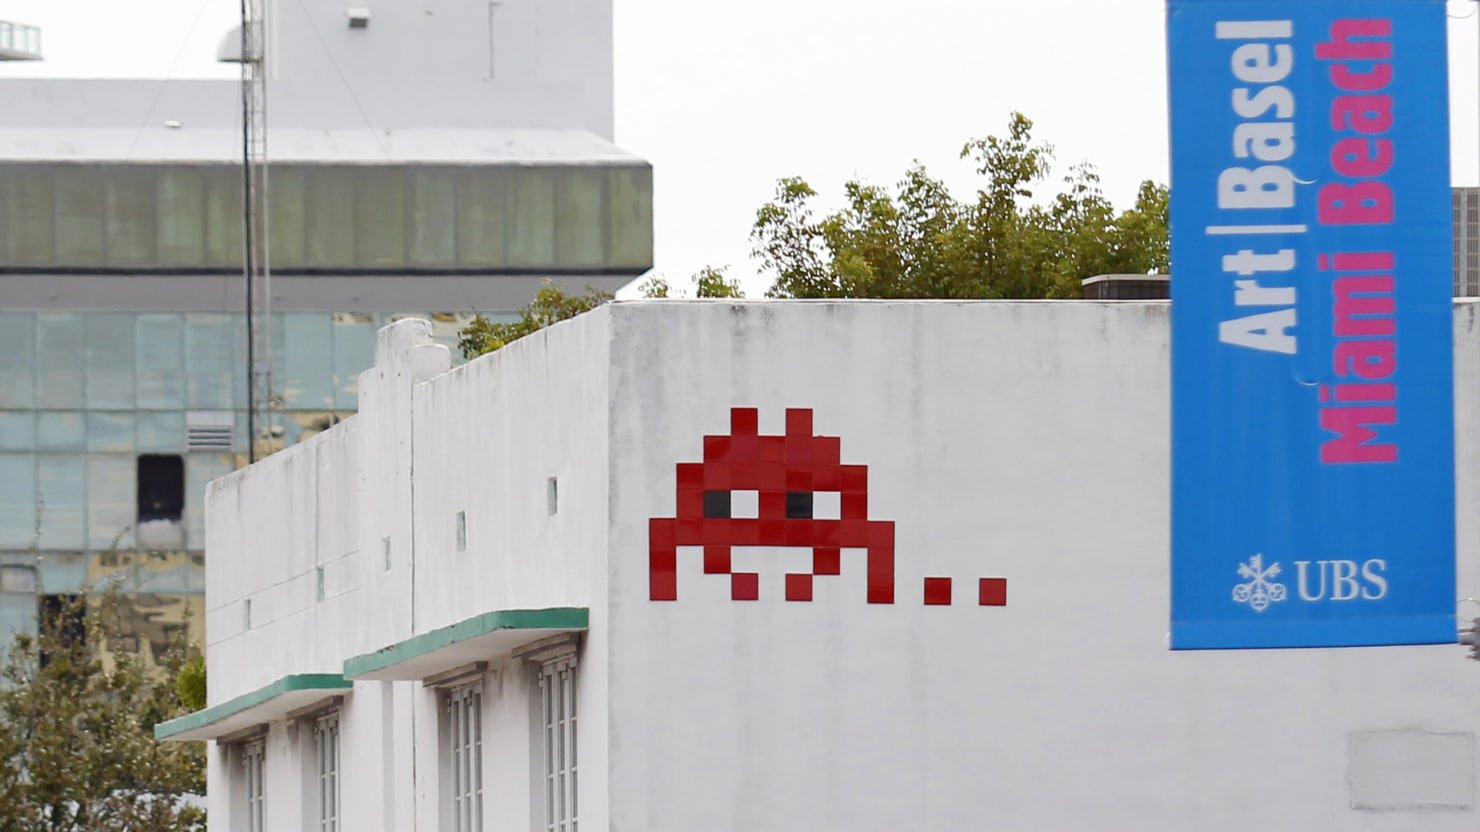 Invader: From Street Art Legend to the Gallery